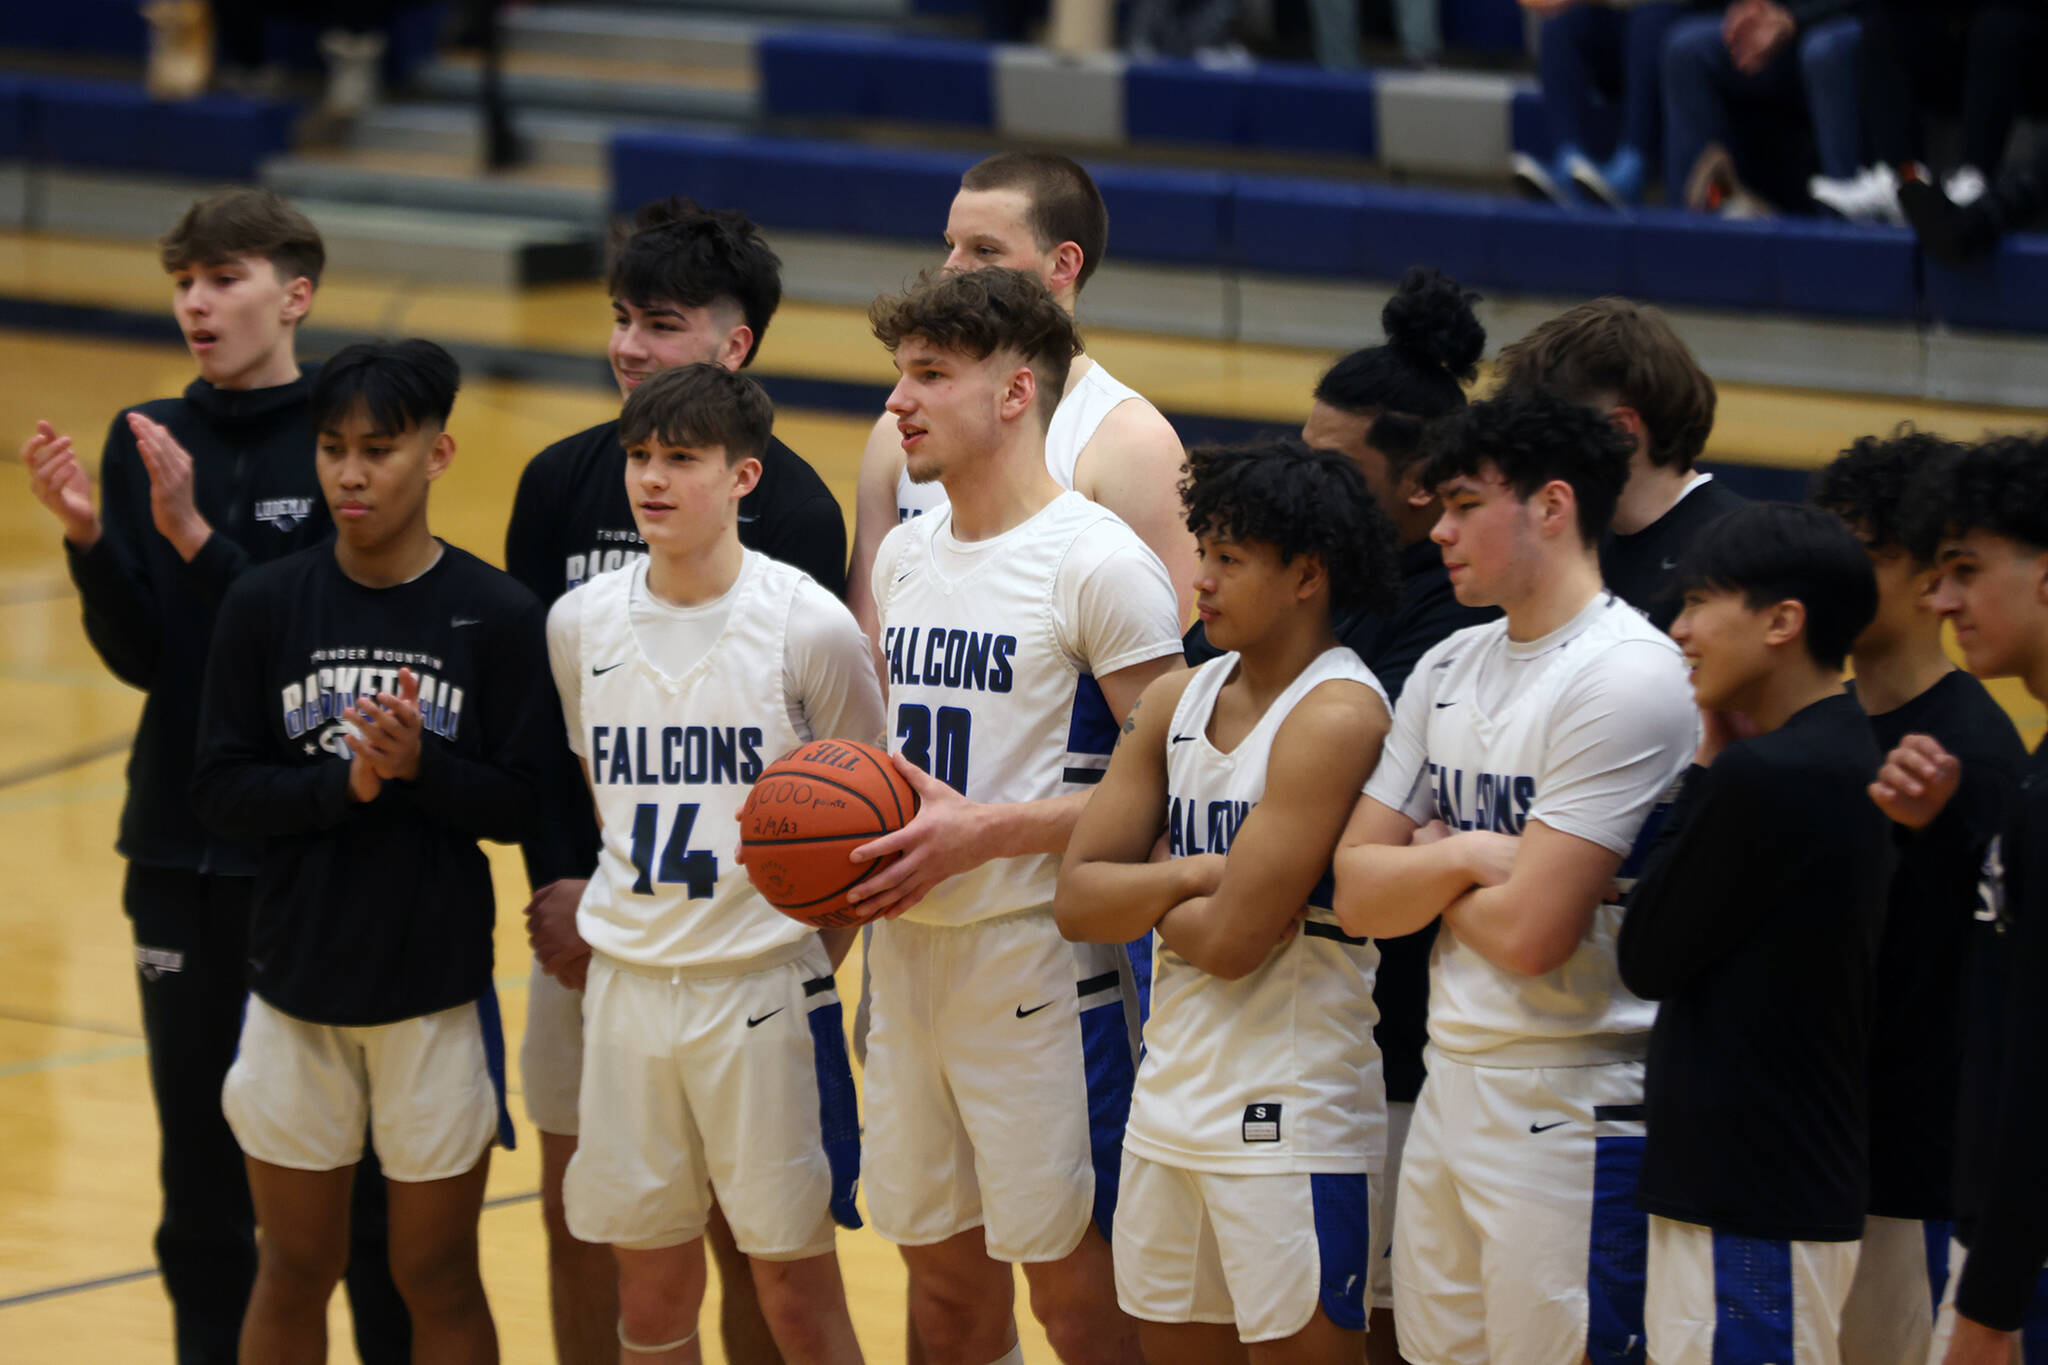 TMHS junior Thomas Baxter (center, holding a ball) stands with teammates before a 64-59 home win against Ketchikan as he is recognized for breaking the 1,000-point mark. (Ben Hohenstatt / Juneau Empire)